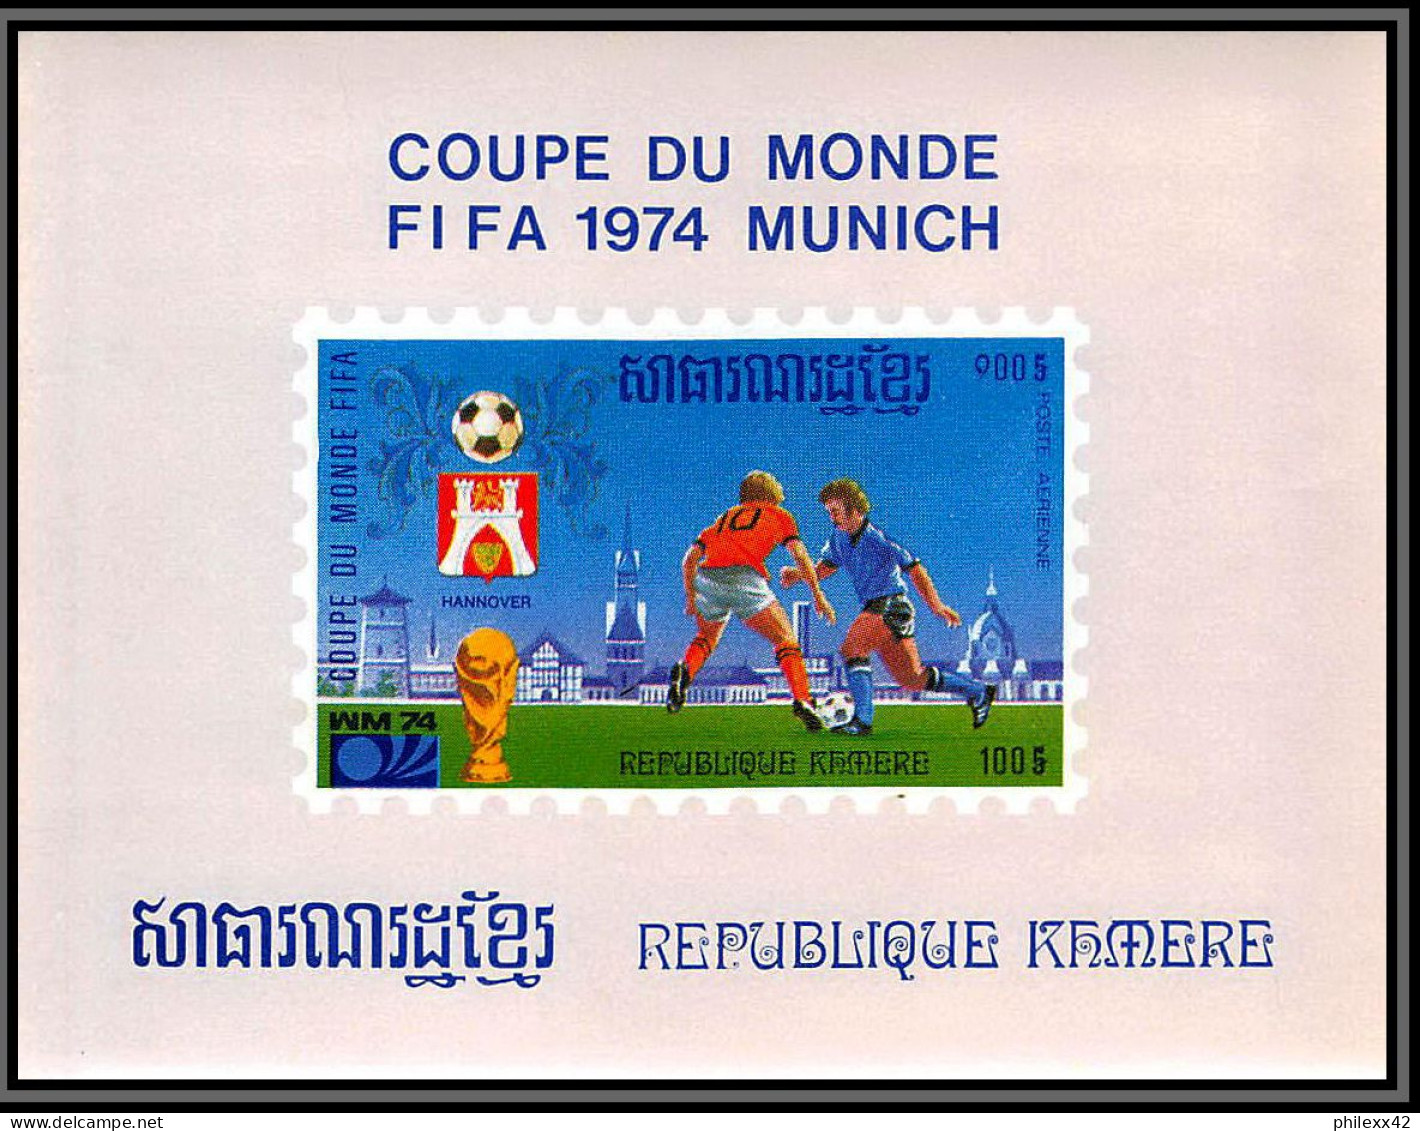 86223 Mi N°420/428 Football soccer munich wold cup 1974 deluxe miniature sheets ** MNH khmère Cambodia cambodge